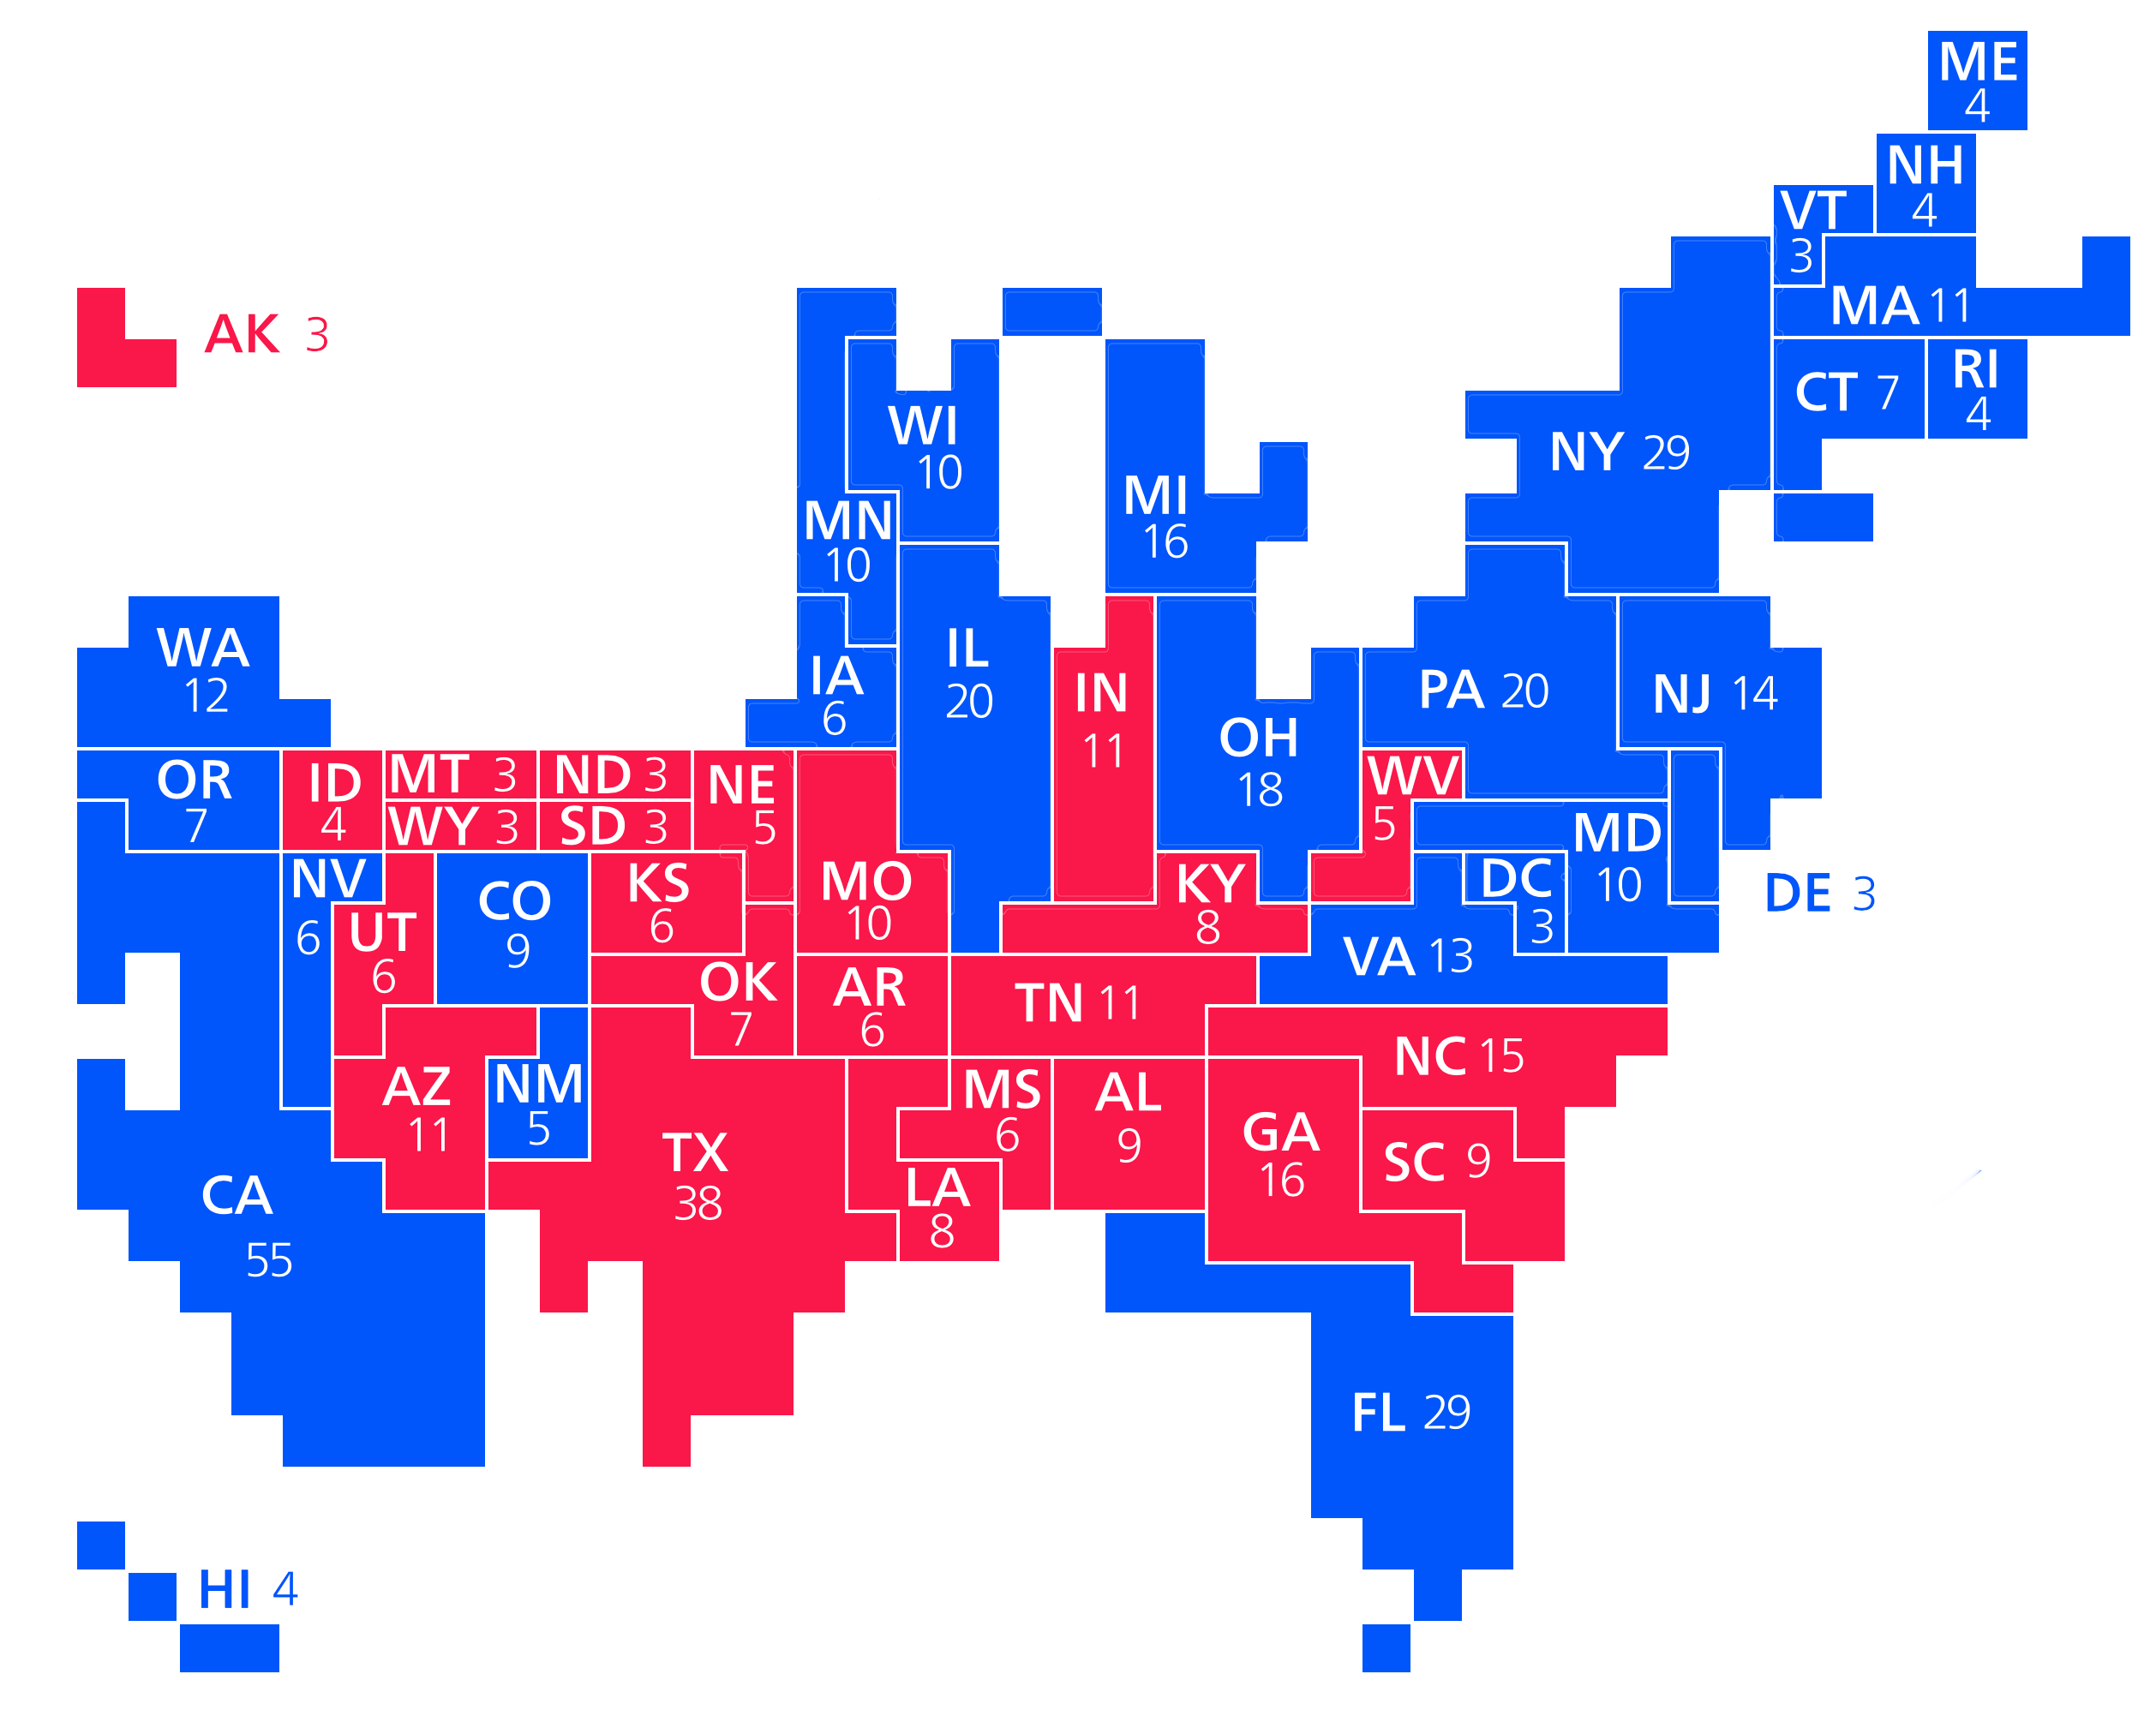 ch-07-election-electoral-college-cartogram.png